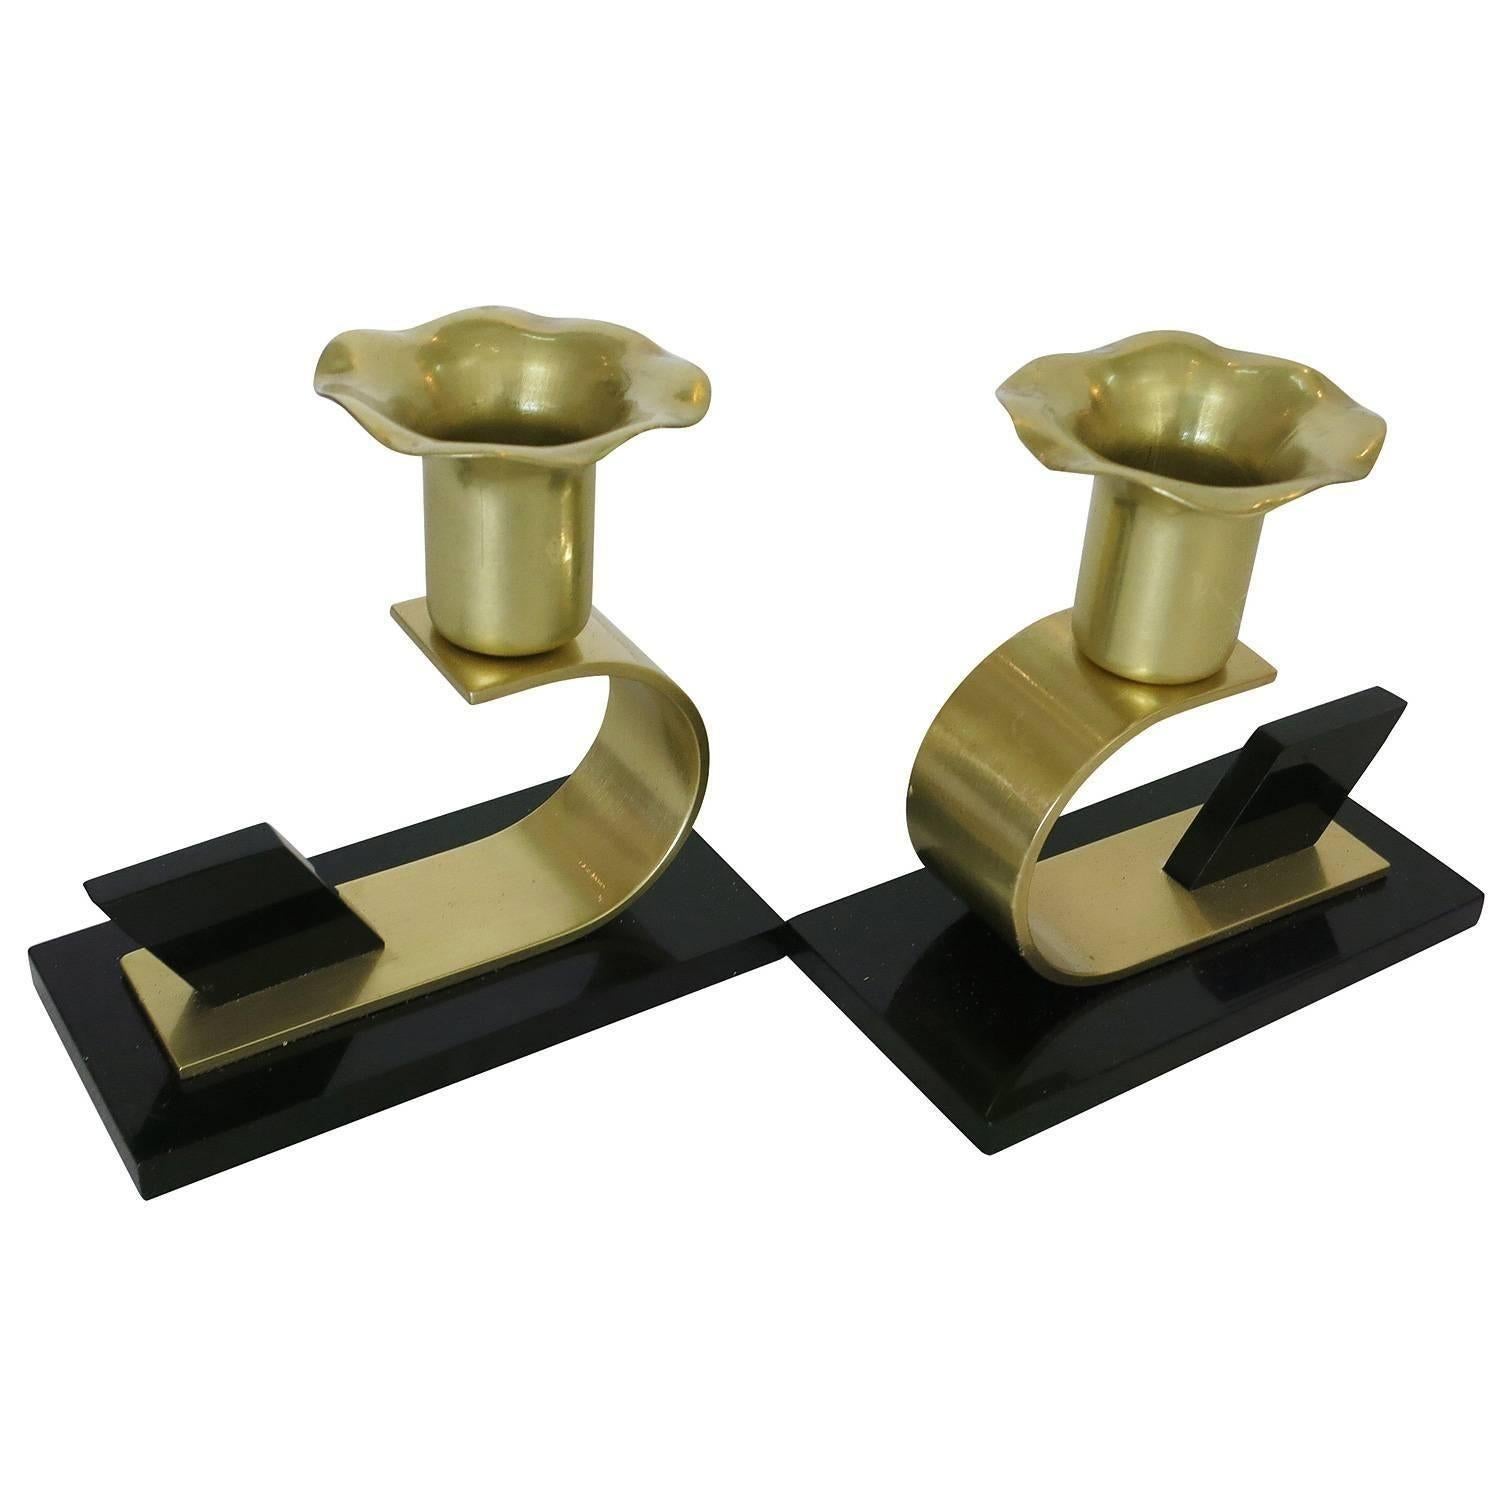 An elegant pair of polished brass and Bakelite Art Deco Modernist floral candle holders designed by the Chase Metalworks Co., of Waterbury, CT.

The 